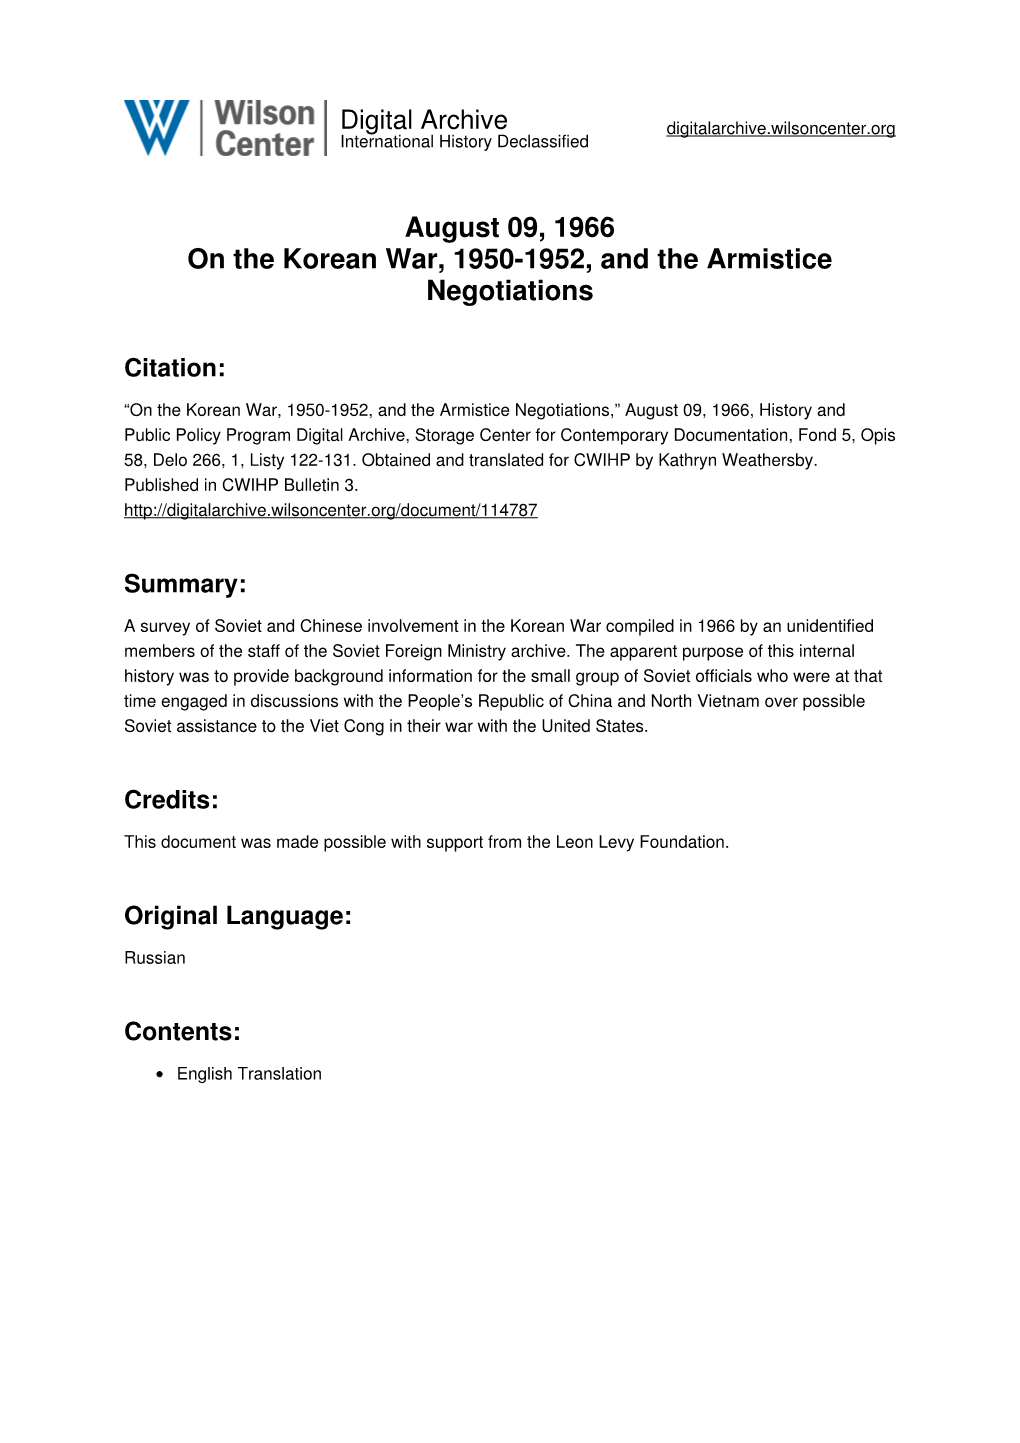 August 09, 1966 on the Korean War, 1950-1952, and the Armistice Negotiations